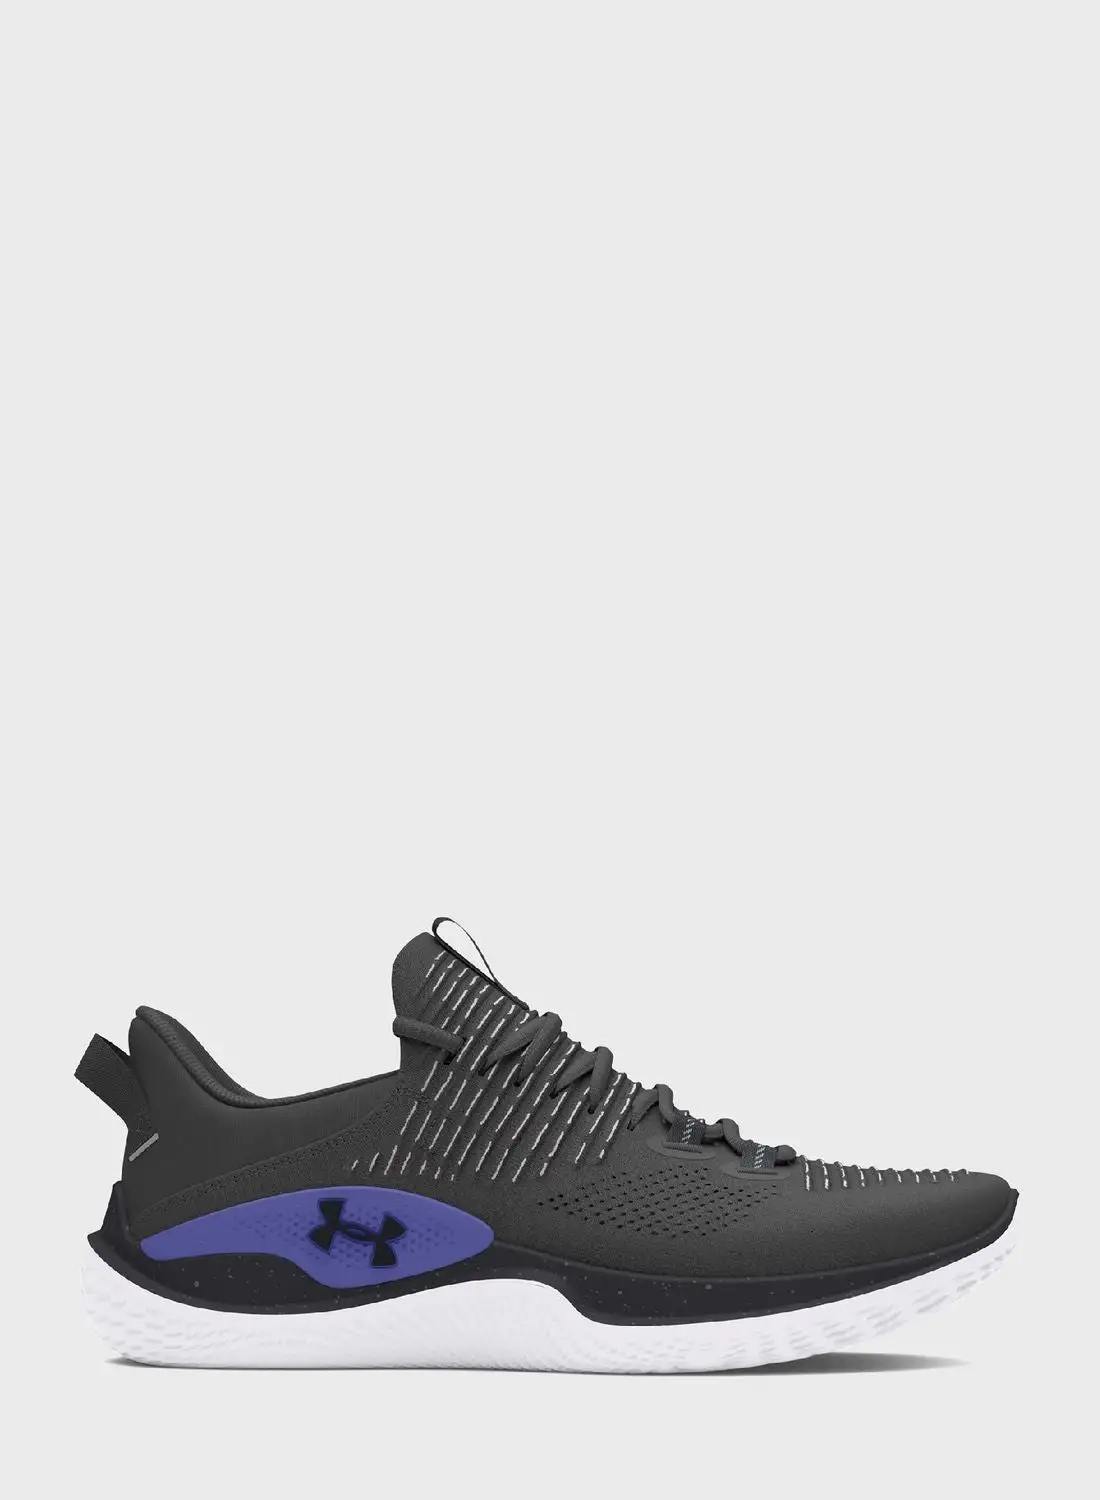 UNDER ARMOUR Flow Dynamic Intelliknight Training Shoes